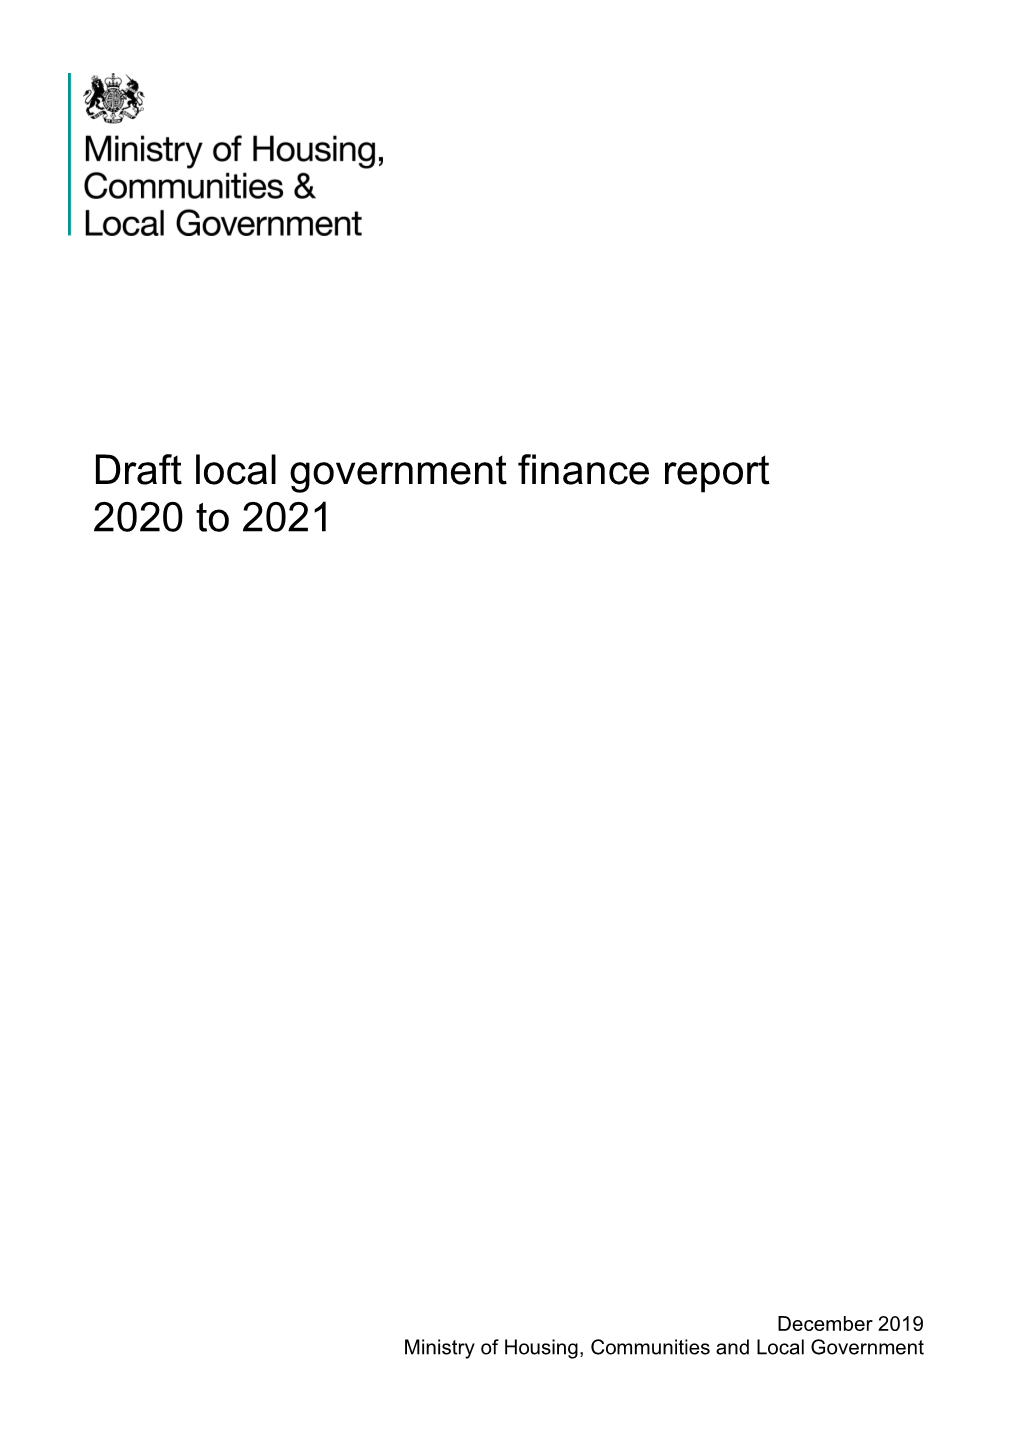 Draft Local Government Finance Report 2020 to 2021